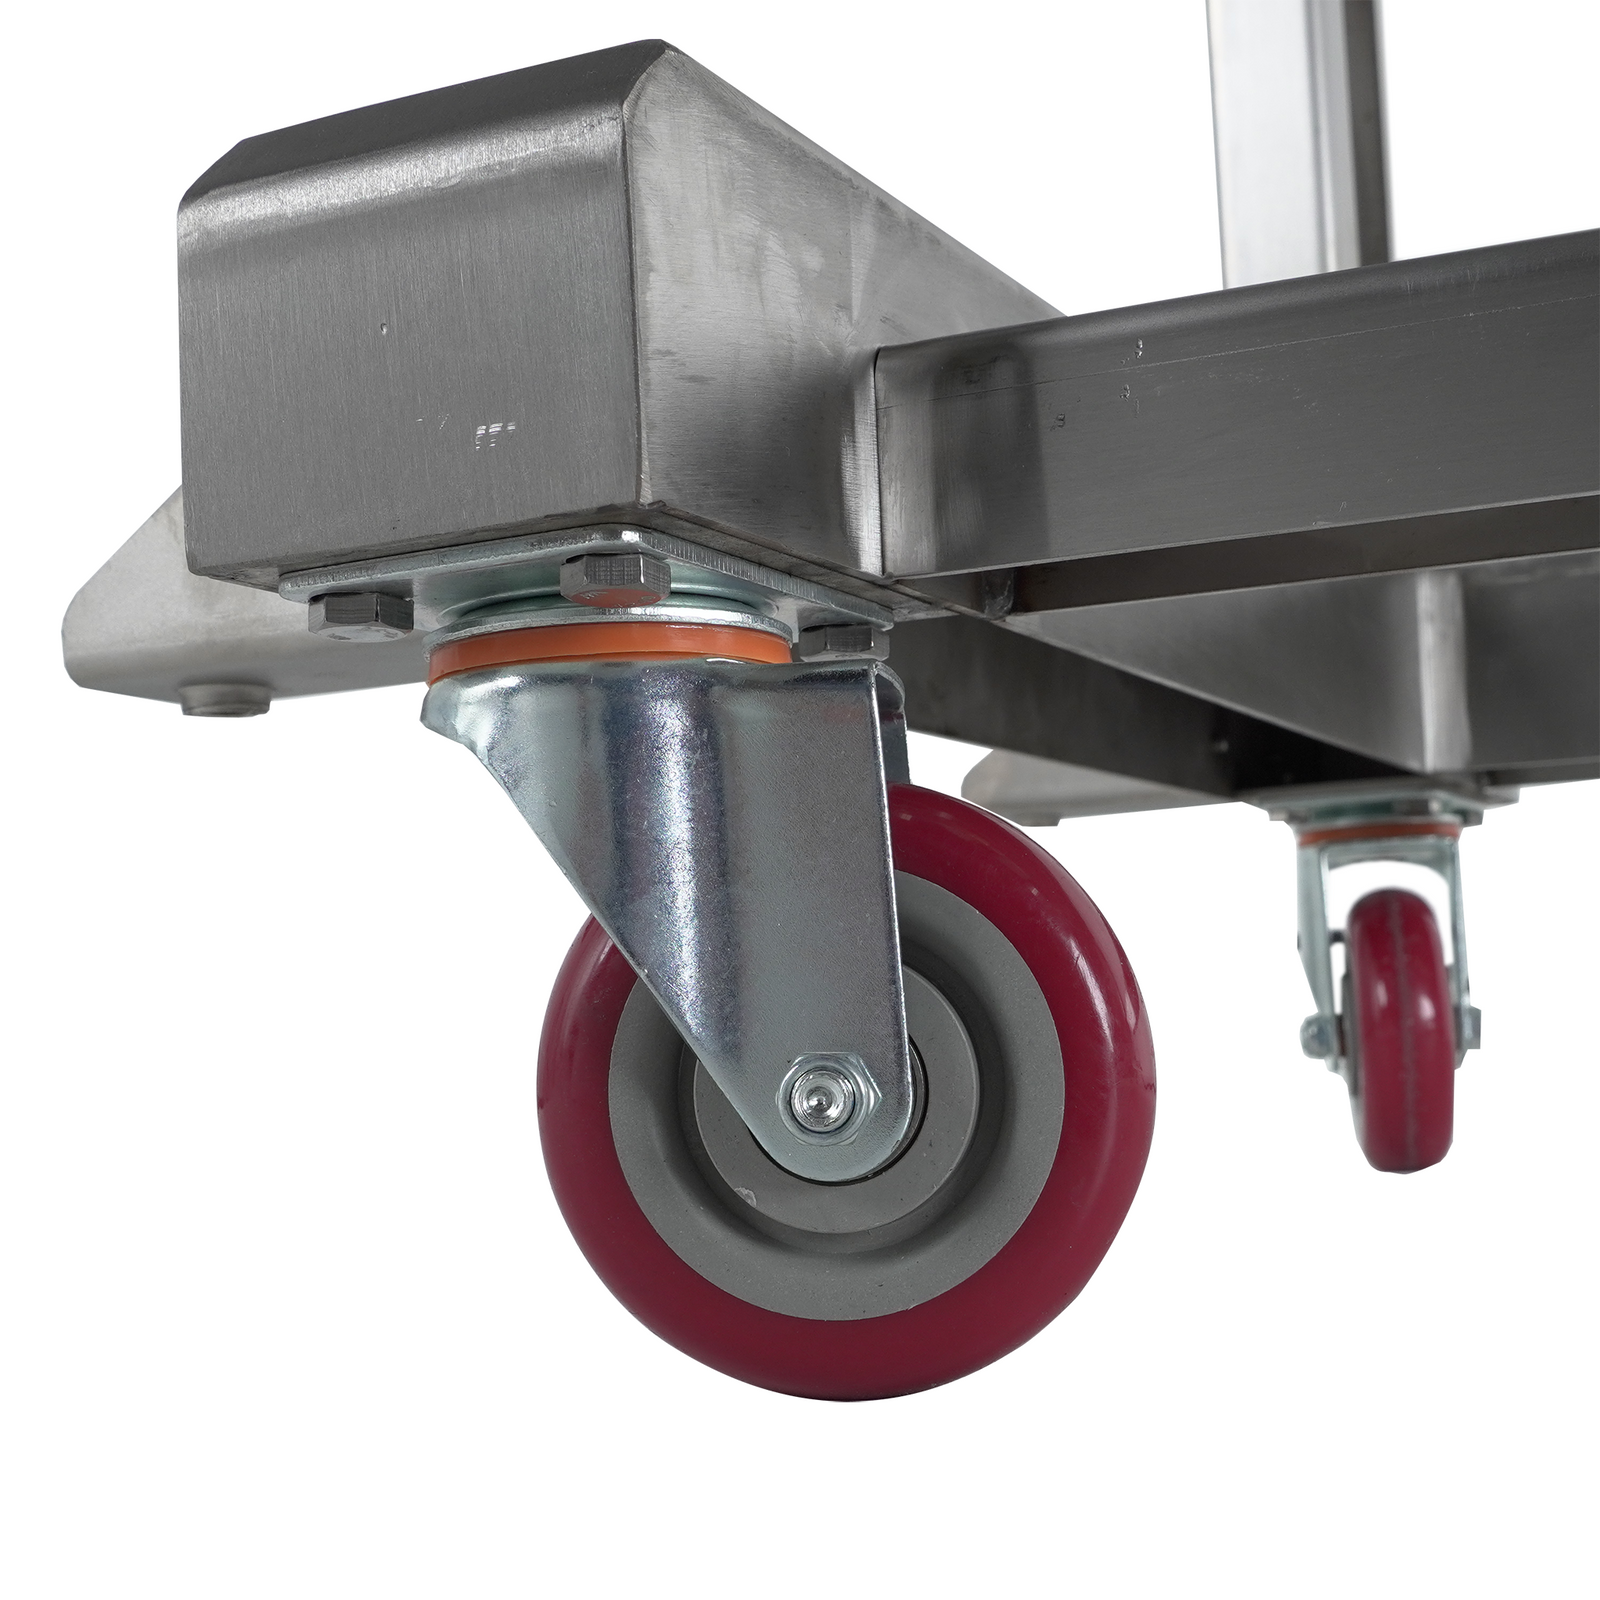 High quality casters on a continuous band sealing machine by JORES TECHNOLOGIES®